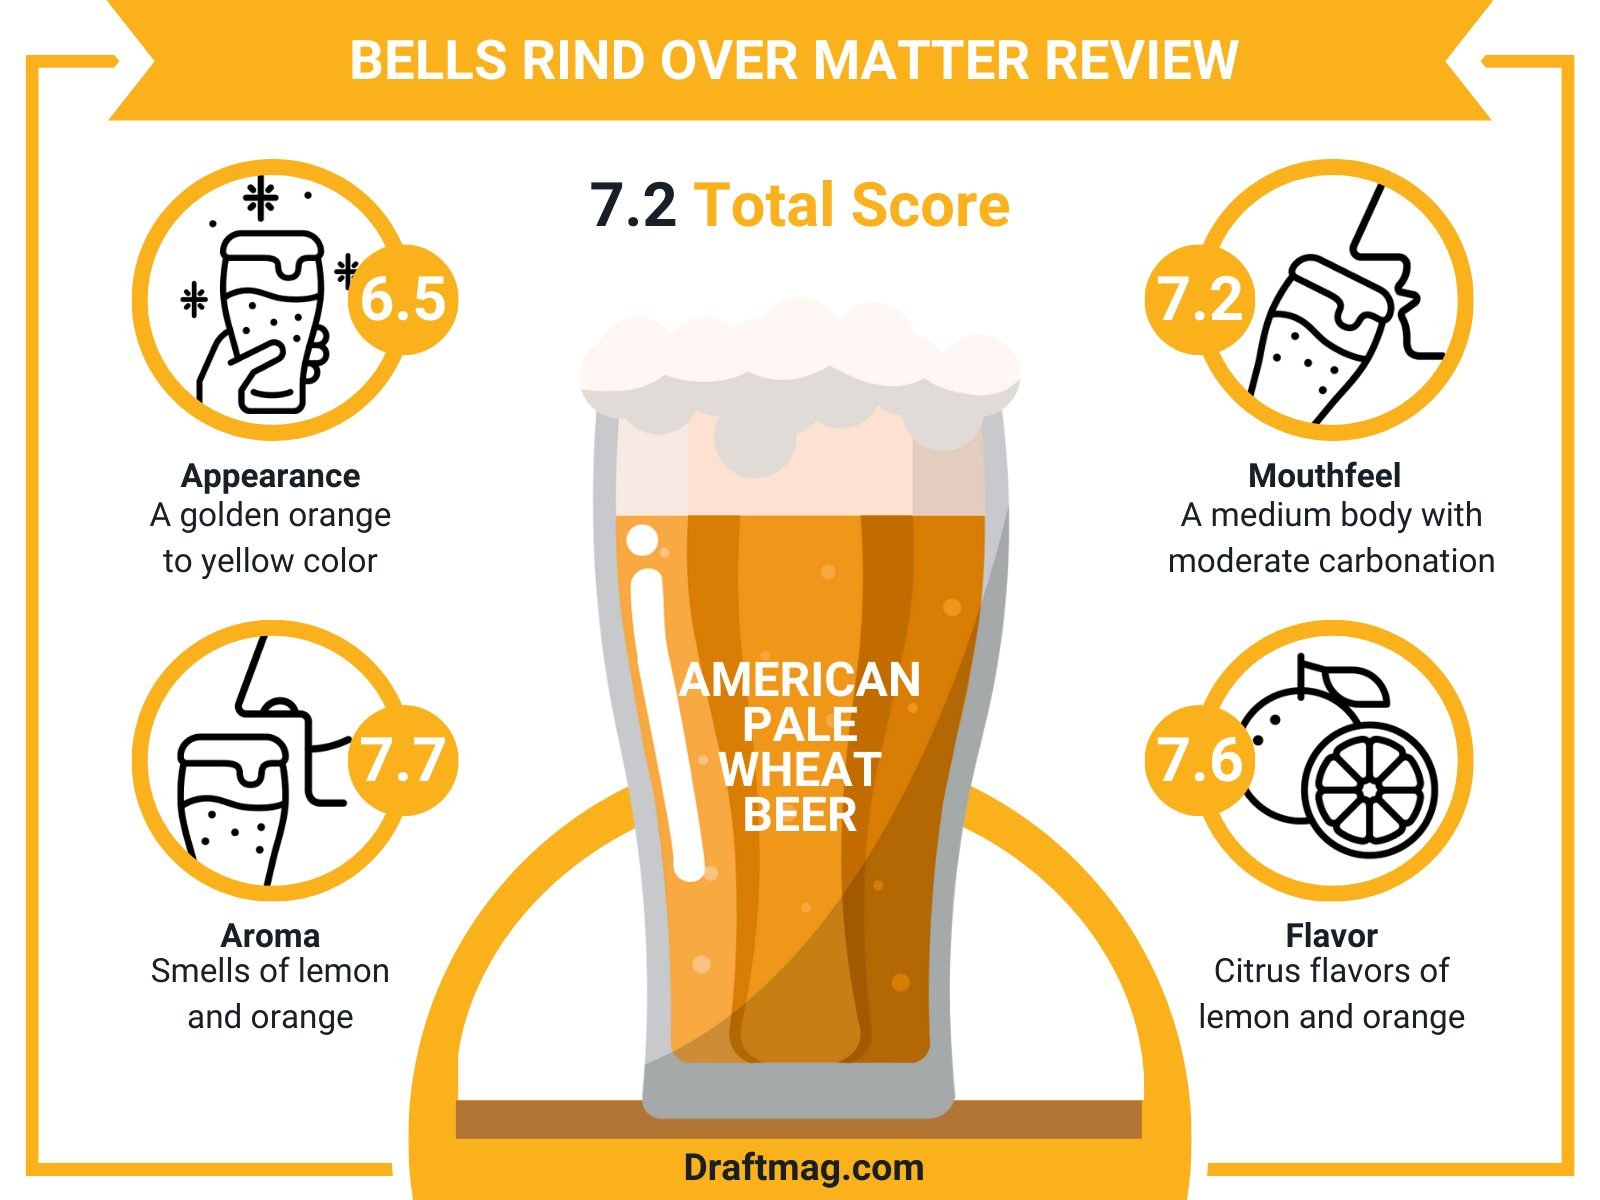 Bells Rind Over Review Infographic